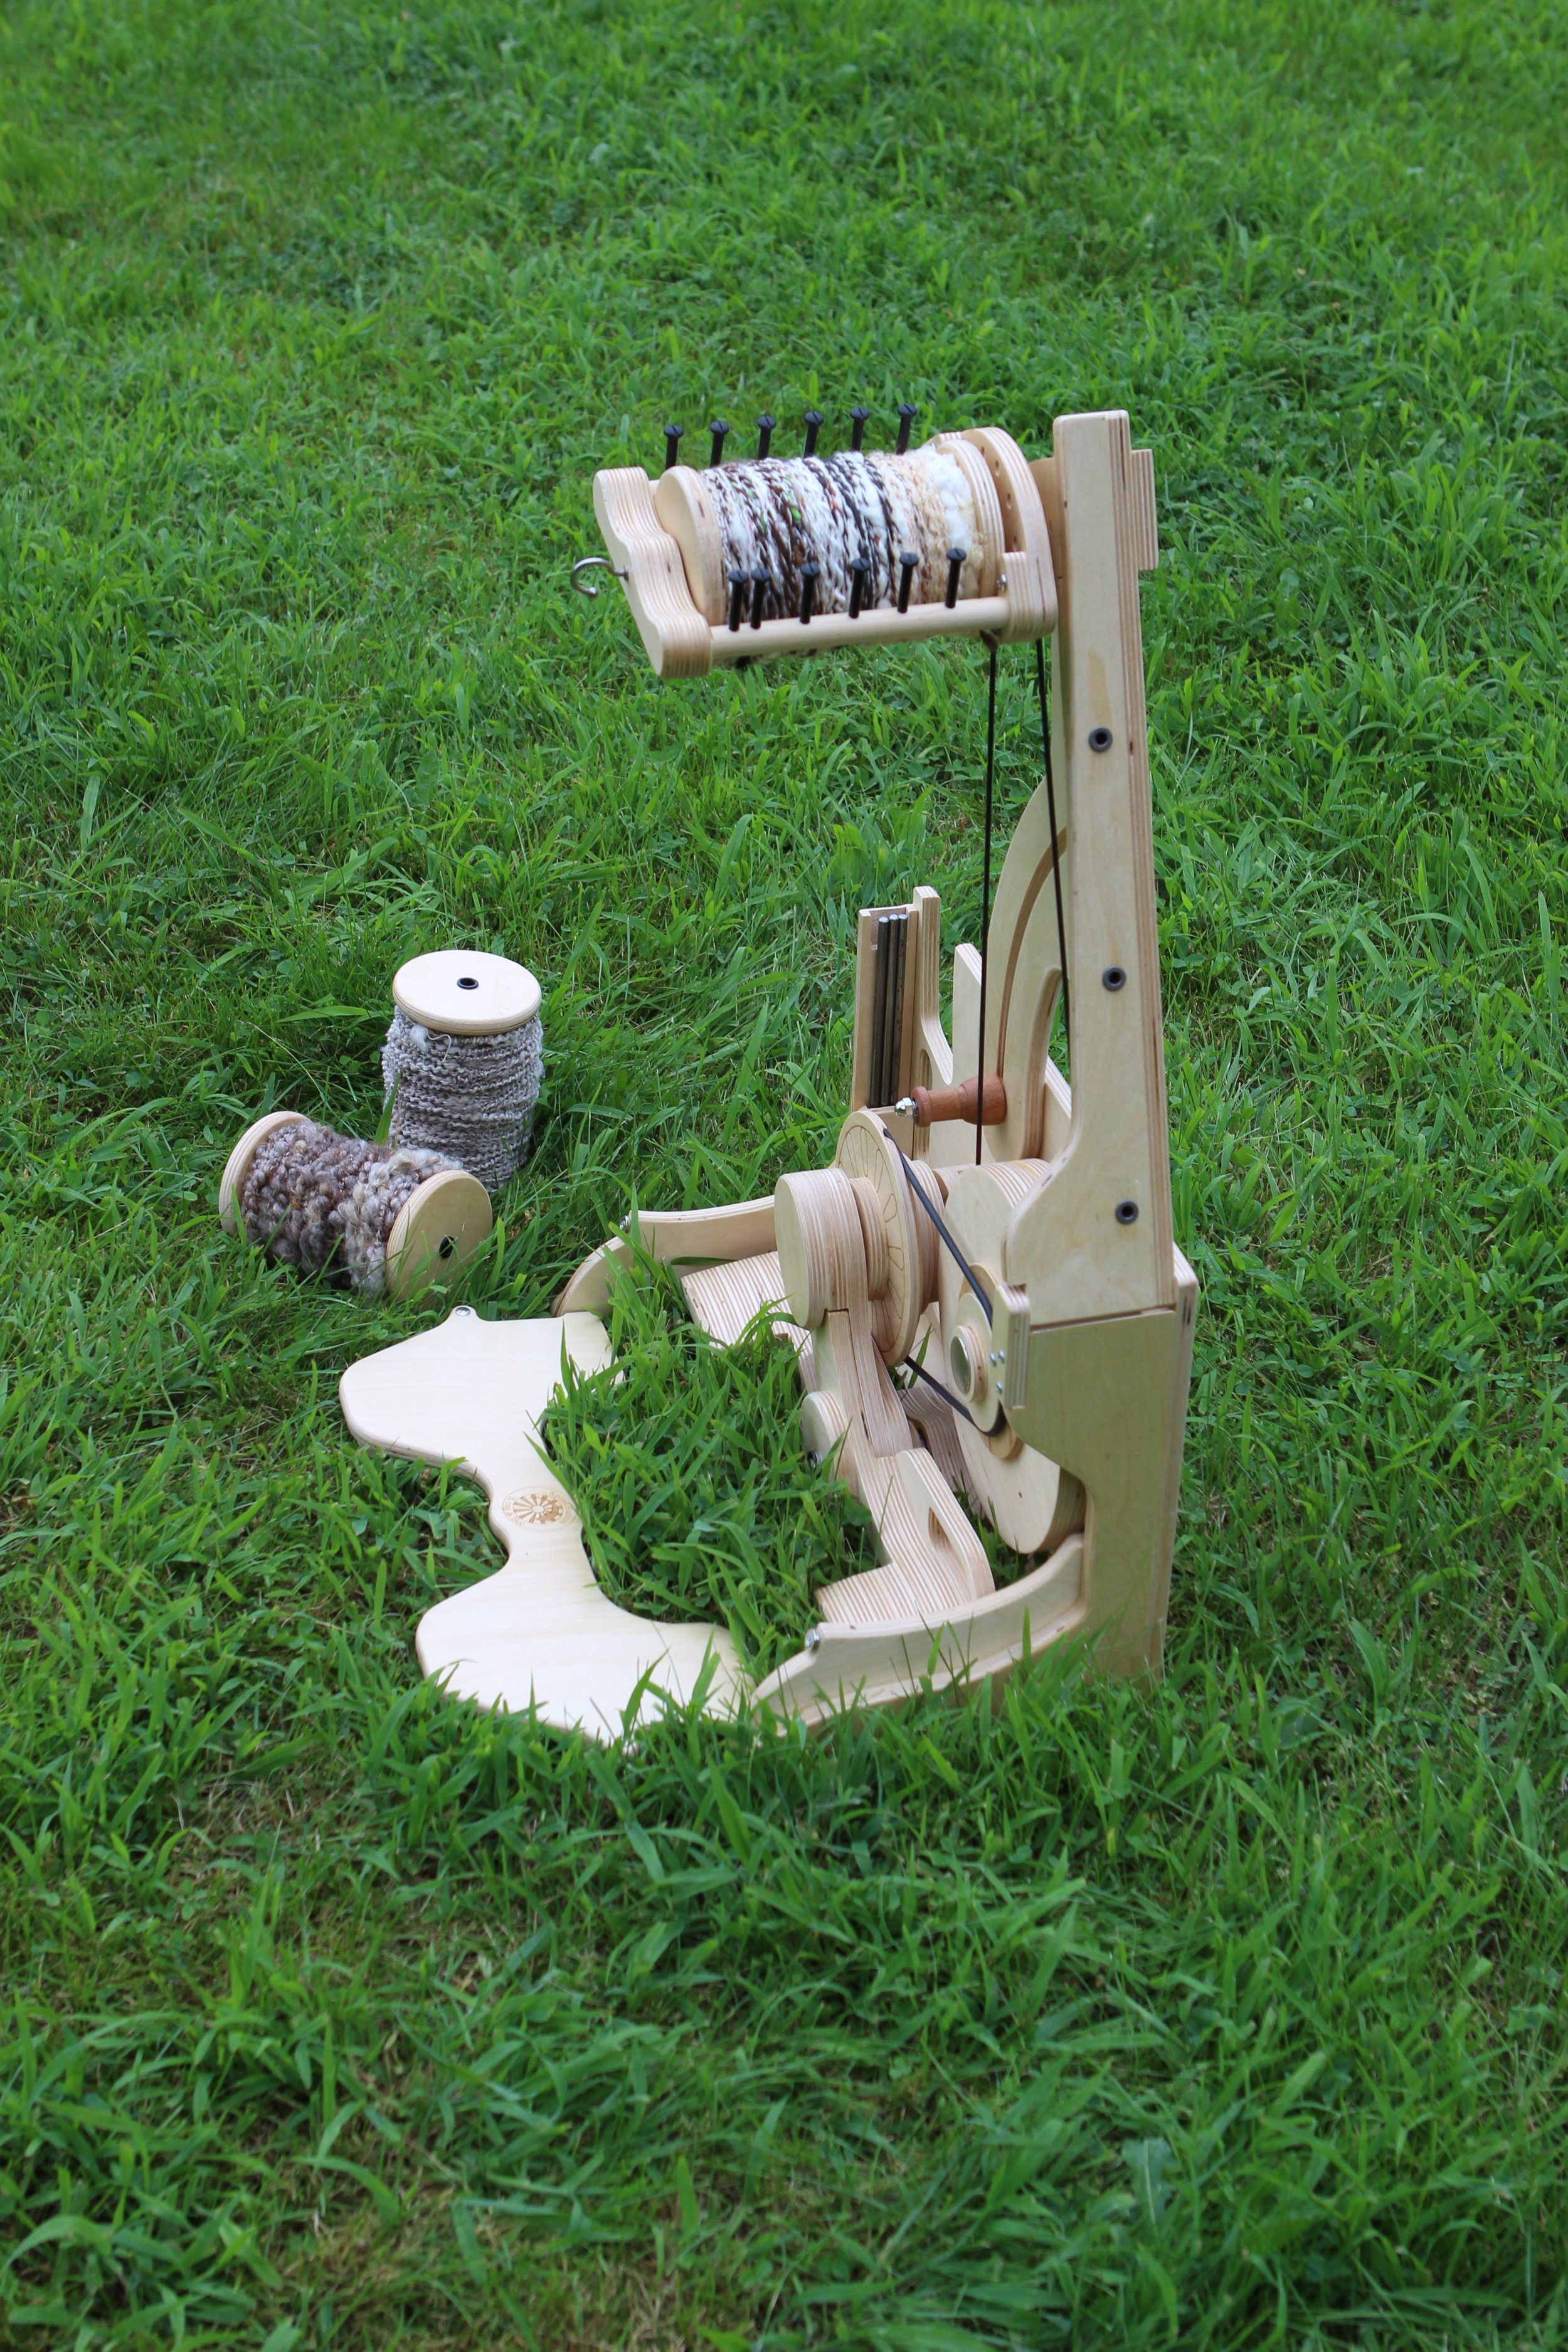 SpinOlution Spinning Wheels: Portable Foldable Baltic Birch Wood Niddy Noddy  Made in the USA — SpinOlution Spinning Wheels made in the Pacific  Northwest, USA. Veteran Owned.